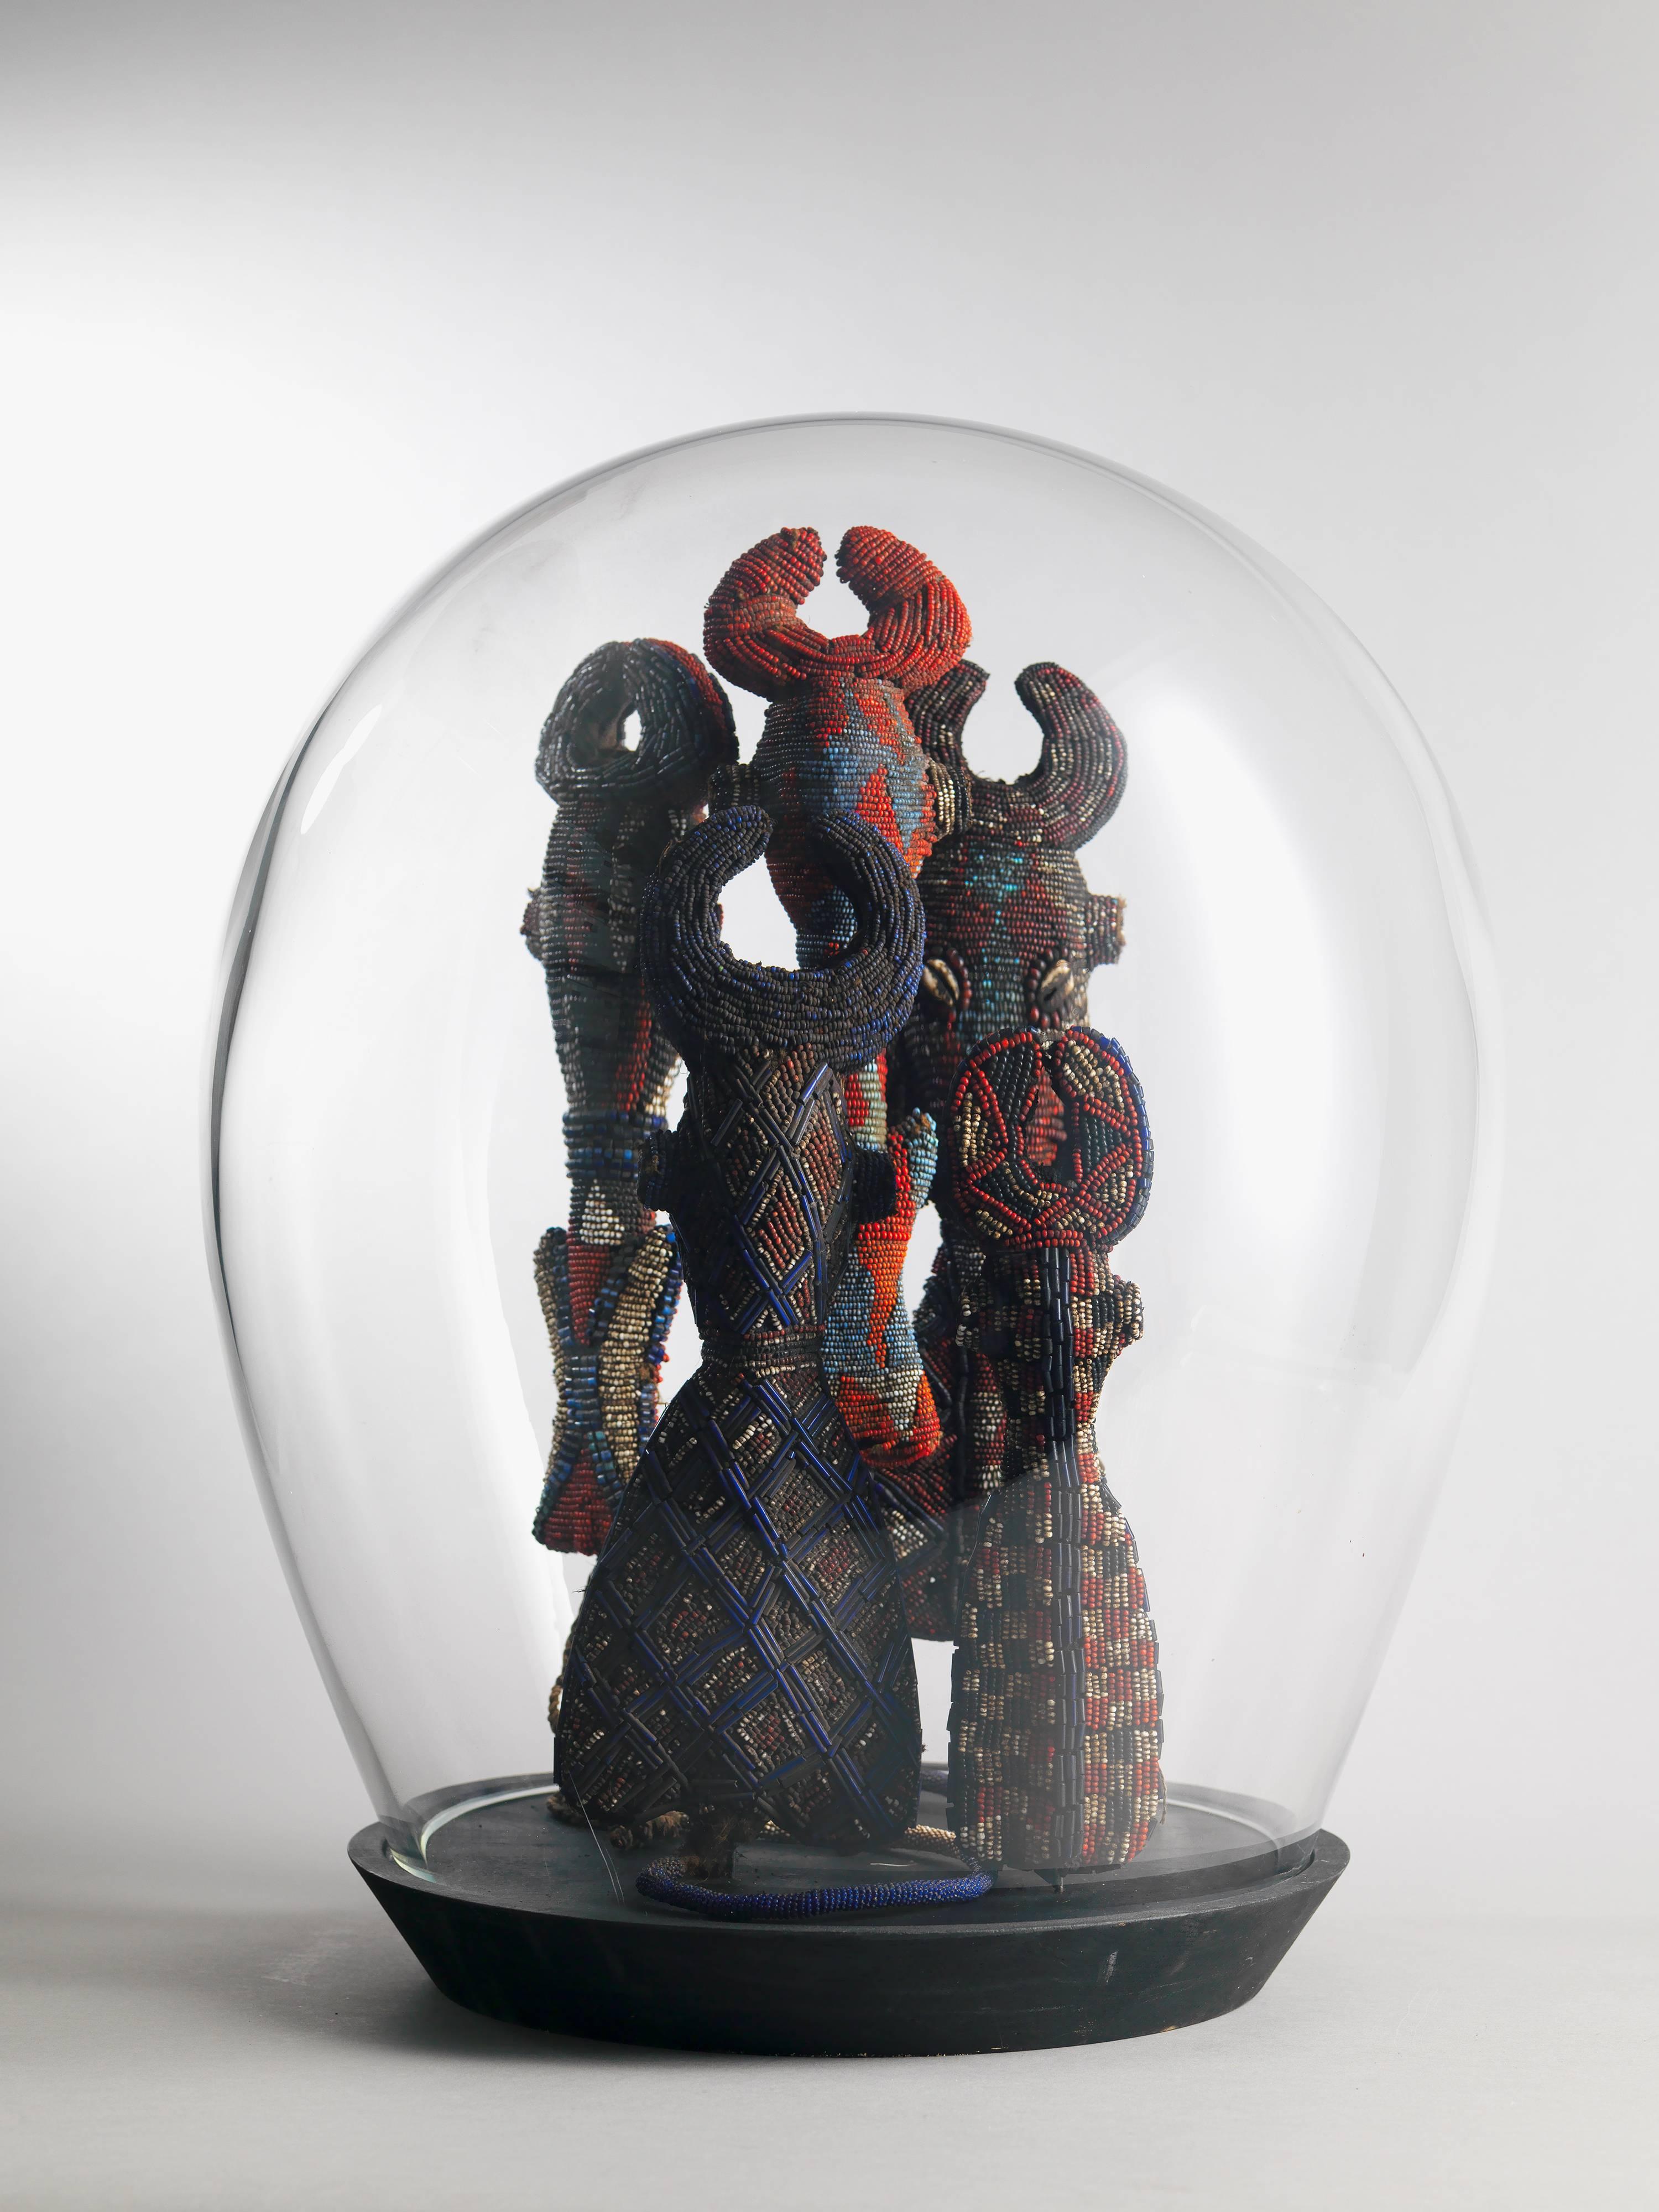 Two very decorative modern handblown domes containing:

Five Ceremonial Flutes or Whistles

Beaded flutes from the Cameroon Grassland come in a variety of geometric form, taking on the shape of a hollowed, stylized figure that combines human and